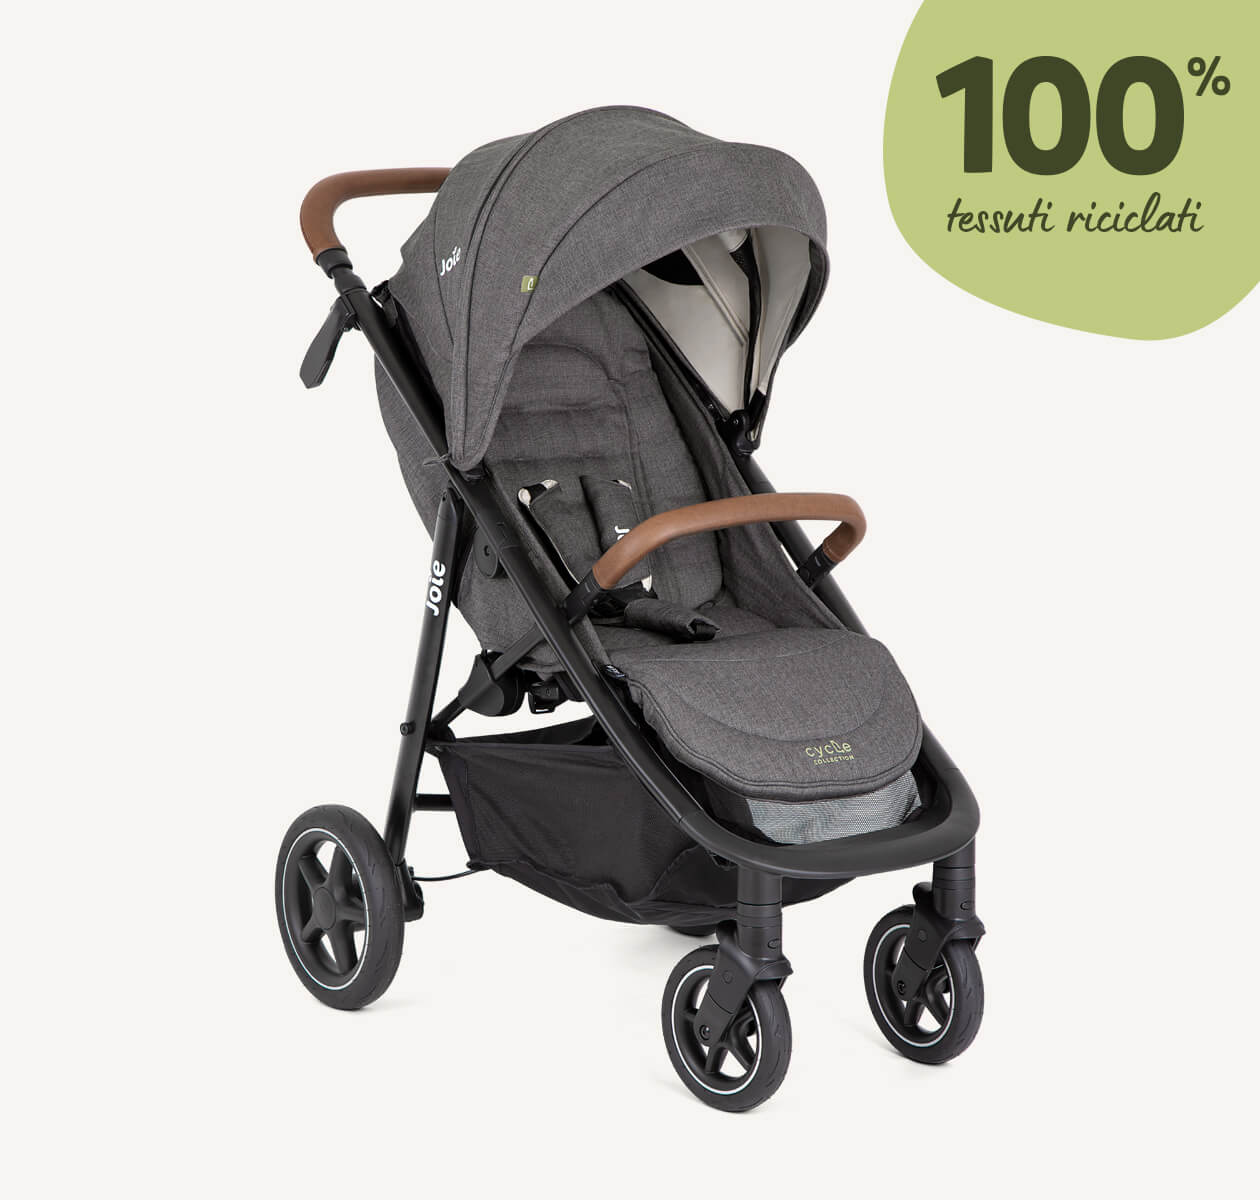 Gray Joie Mytrax Pro stroller facing to the right at a 45 degree angle.